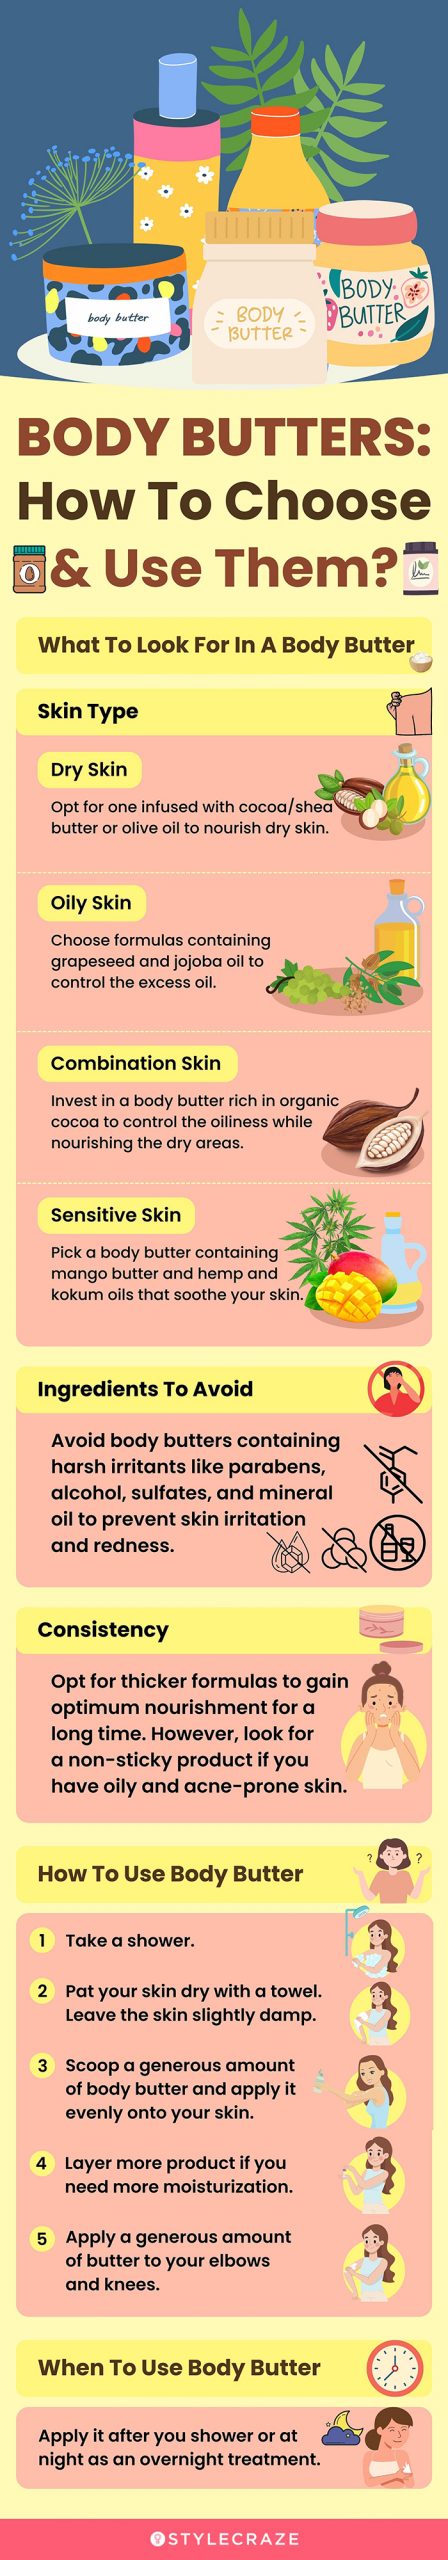 Body Butters: How To Choose and Use Them (infographic)